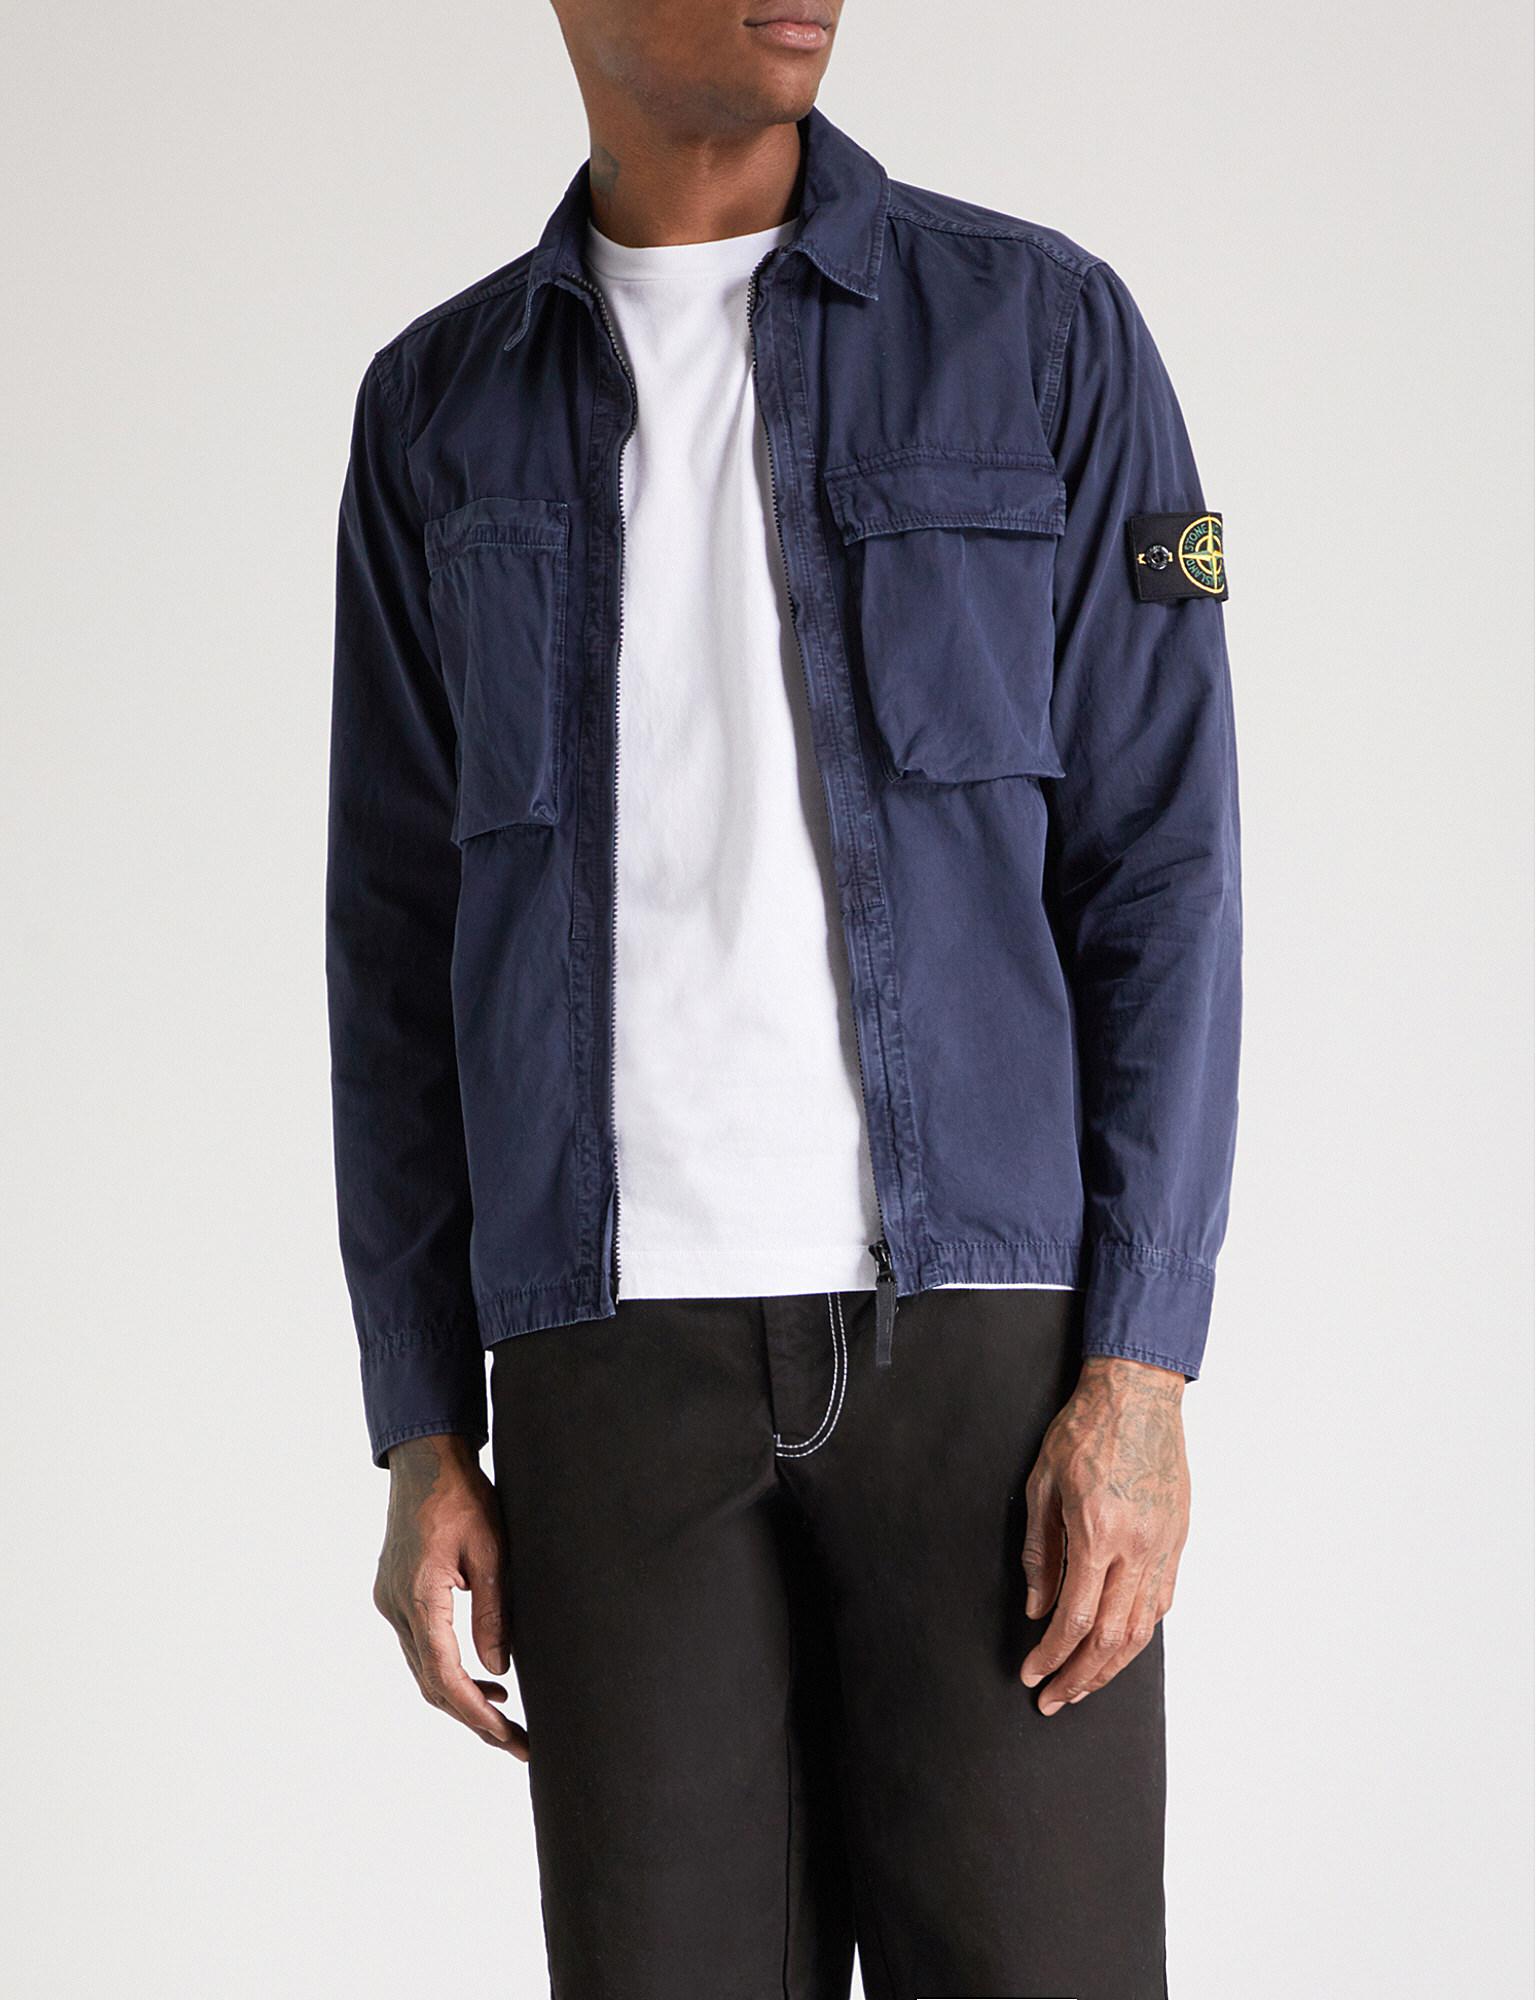 Stone Island Brushed Cotton Jacket in Blue for Men - Lyst